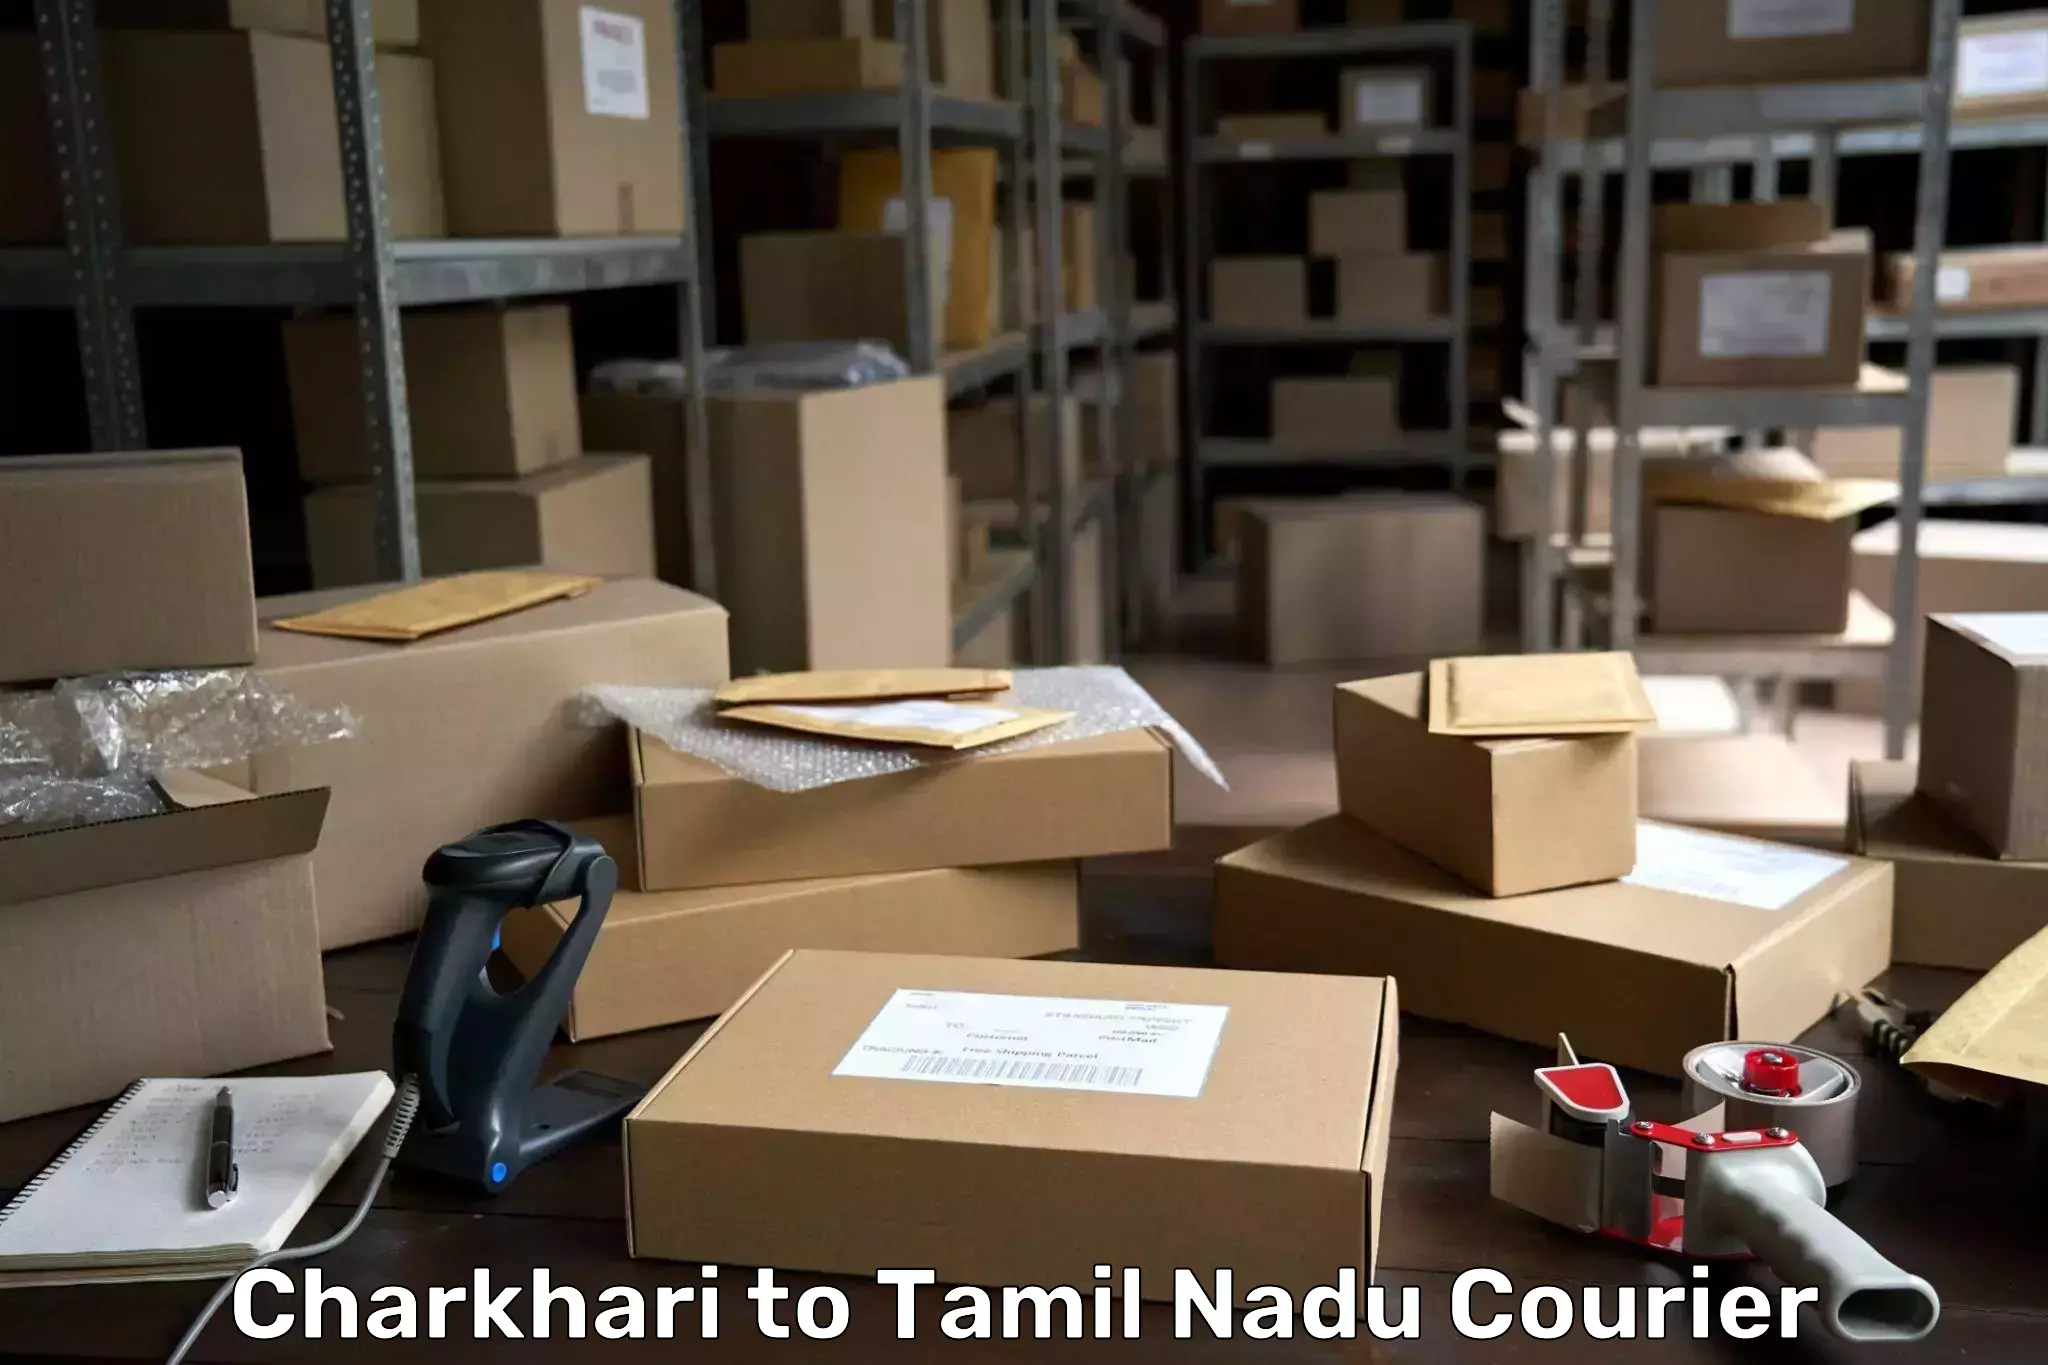 Global courier networks Charkhari to Ennore Port Chennai